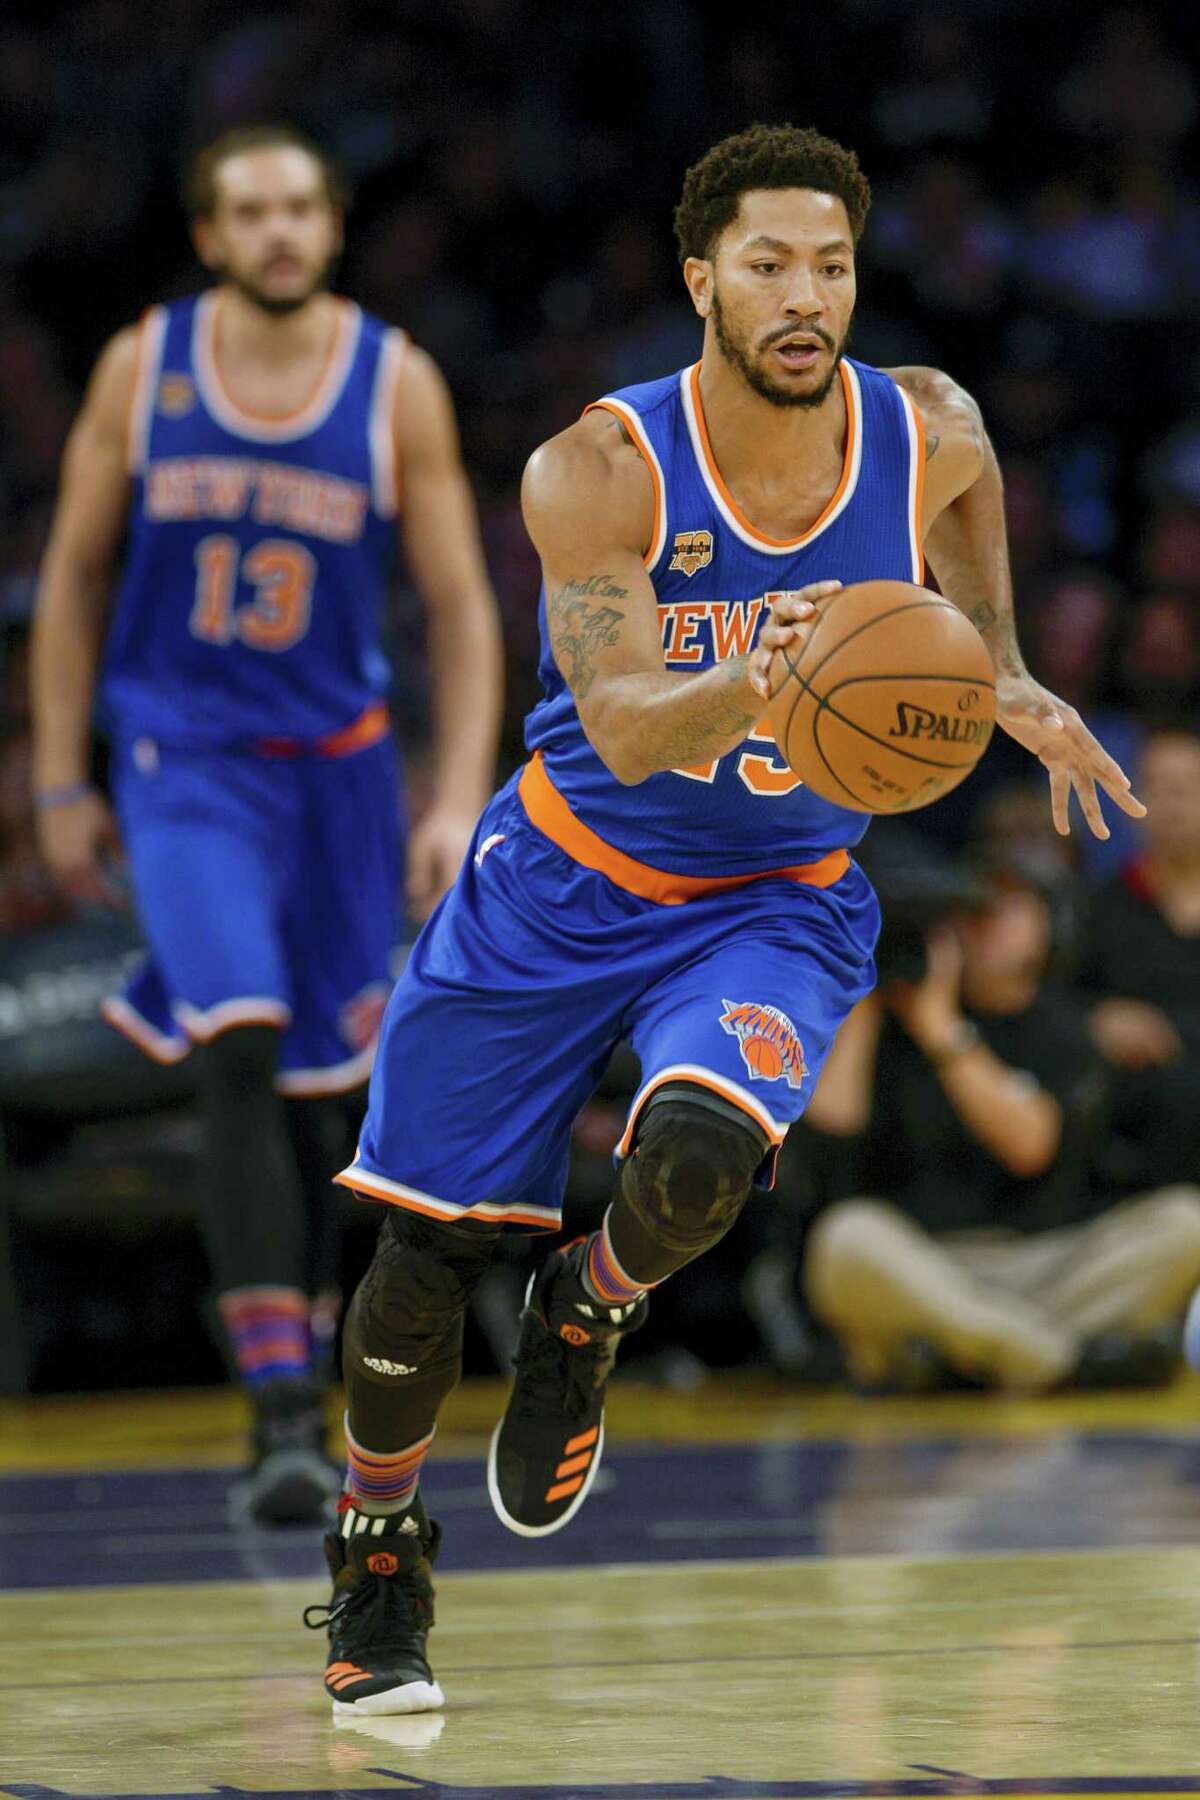 New York Knicks point guard Derrick Rose brings the ball up the court during the first half of an NBA basketball game against the Los Angeles Lakers on Sunday, Dec. 11, 2016 in Los Angeles.